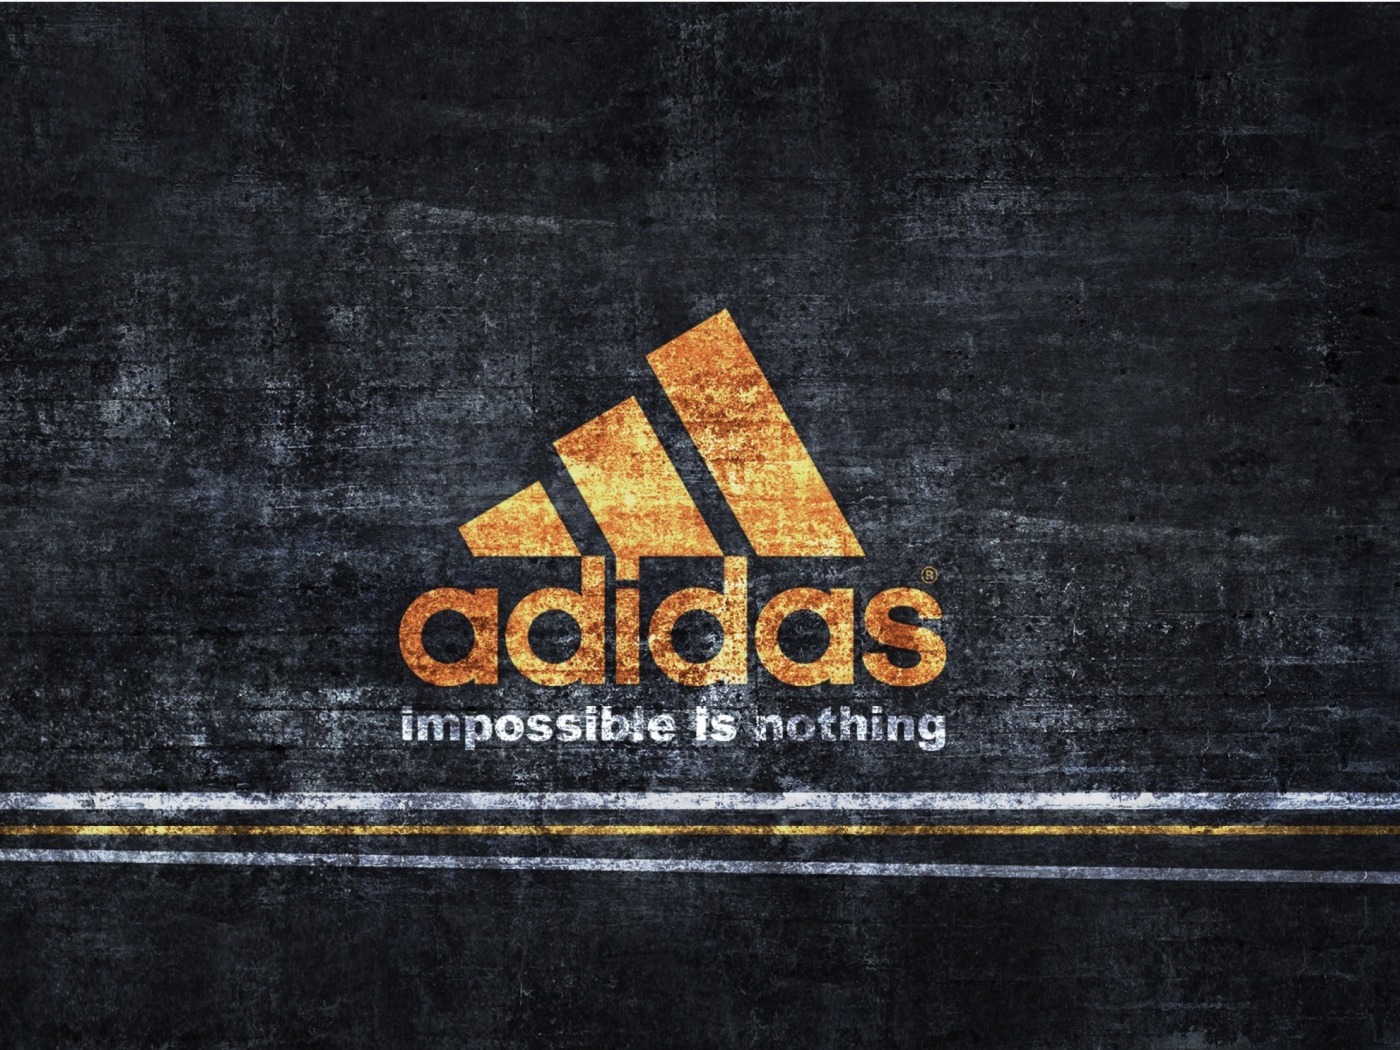 Adidas – Impossible is Nothing wallpaper 1400x1050